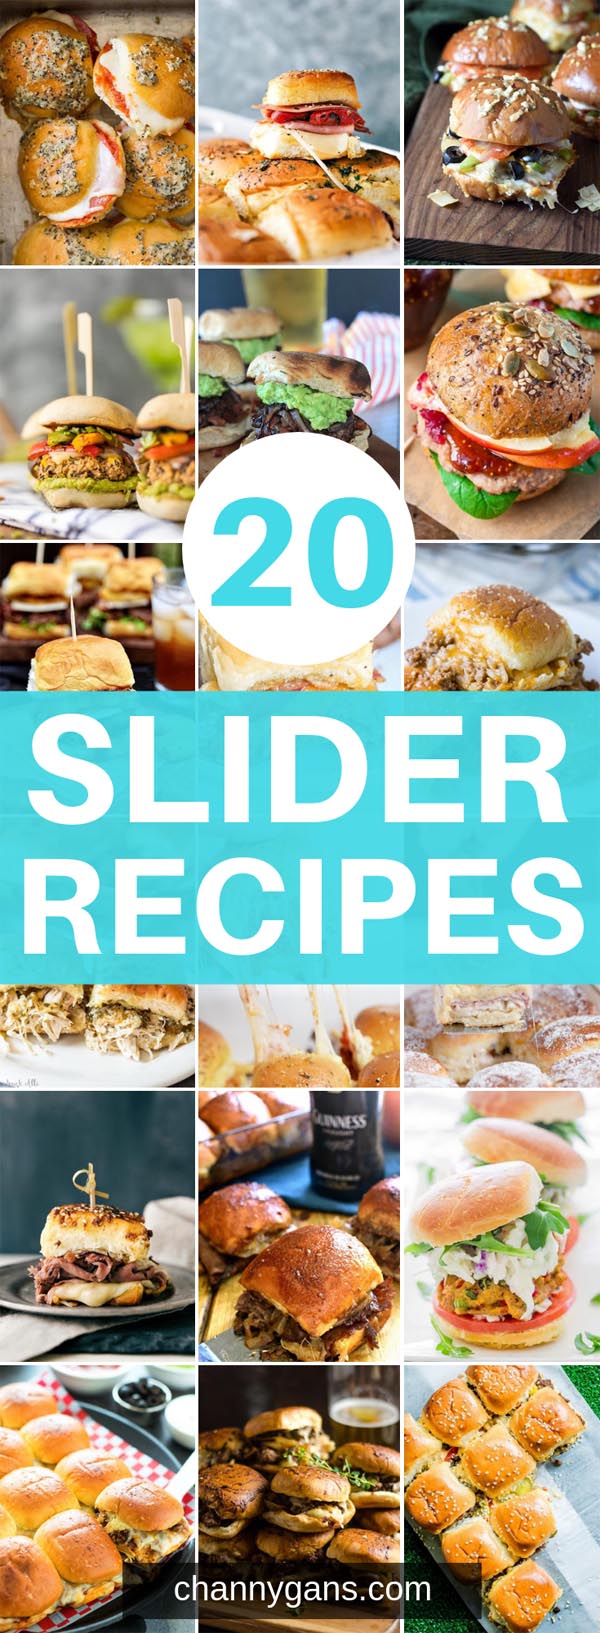 20 Slider Recipes. These slider recipes are perfect if you're hosting a party or having friends or family over for a quick and easy dinner.